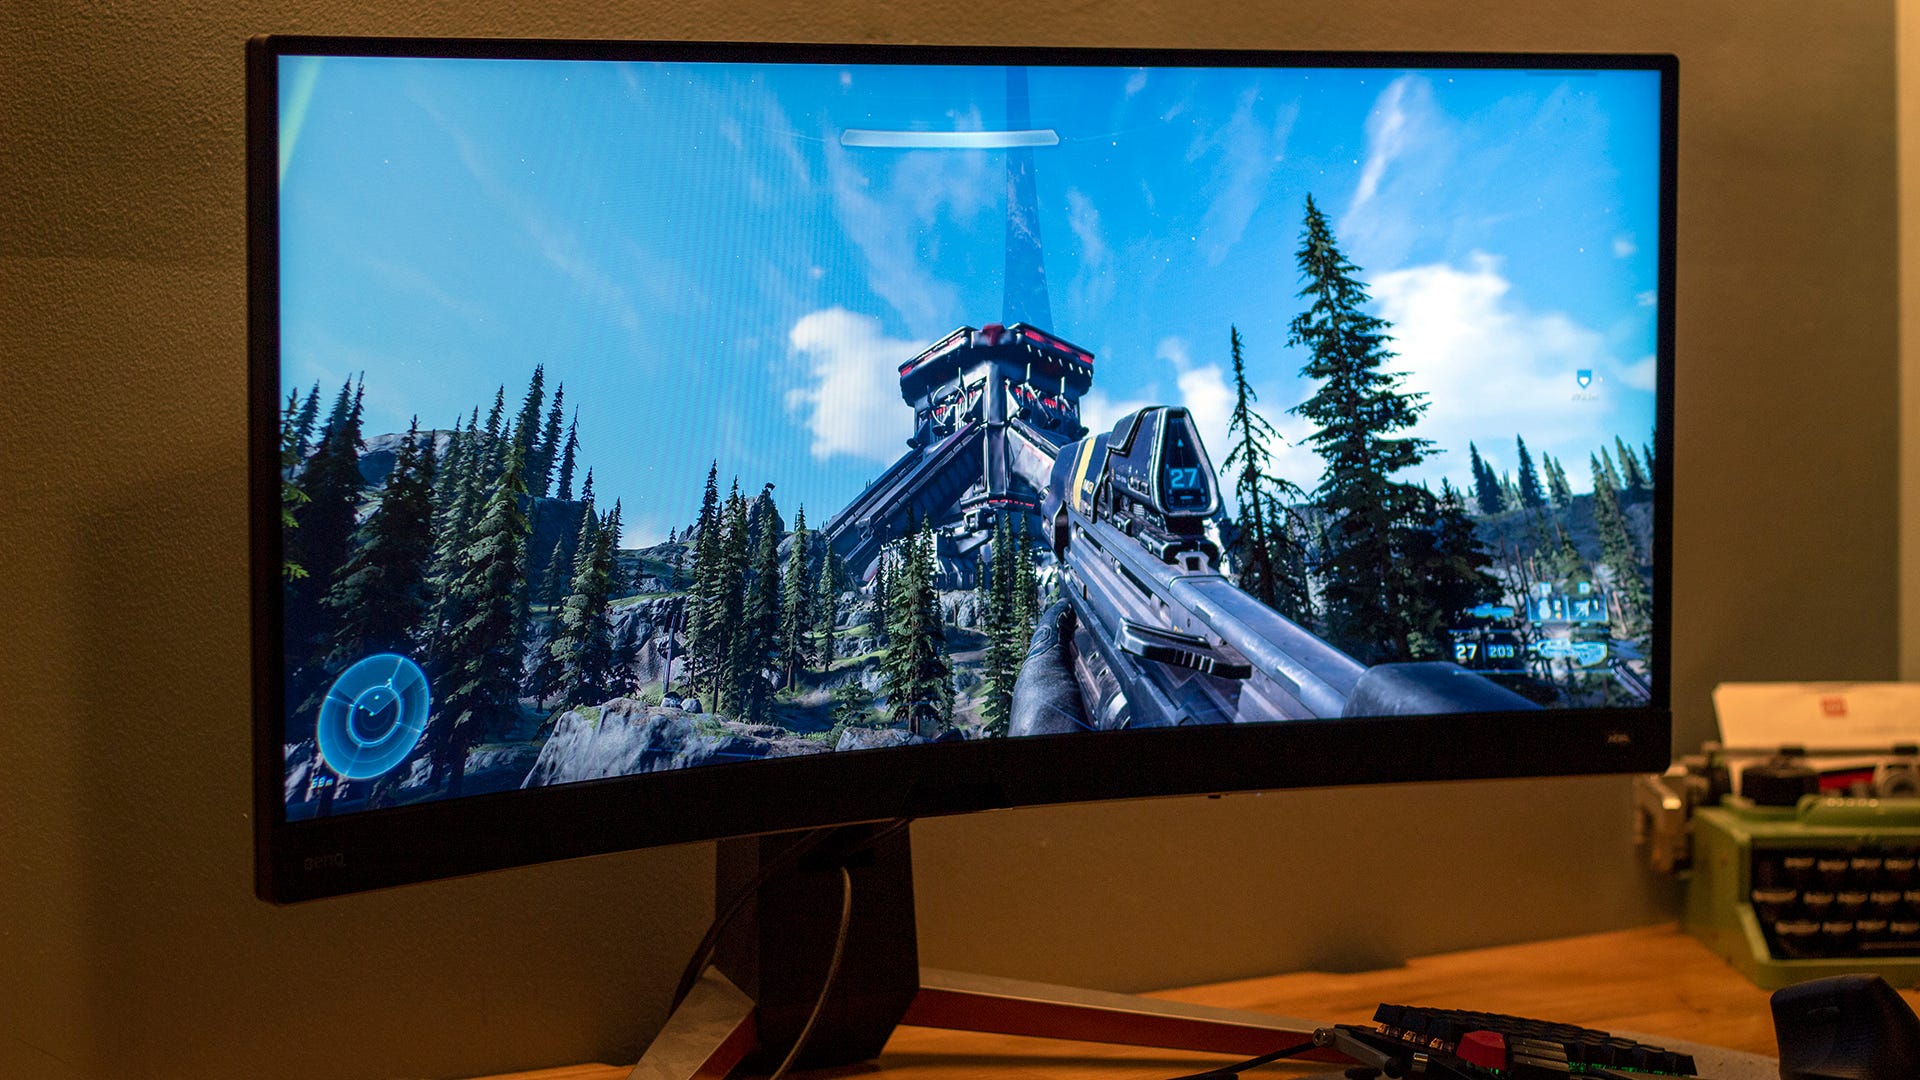 'Halo' running on a gaming monitor